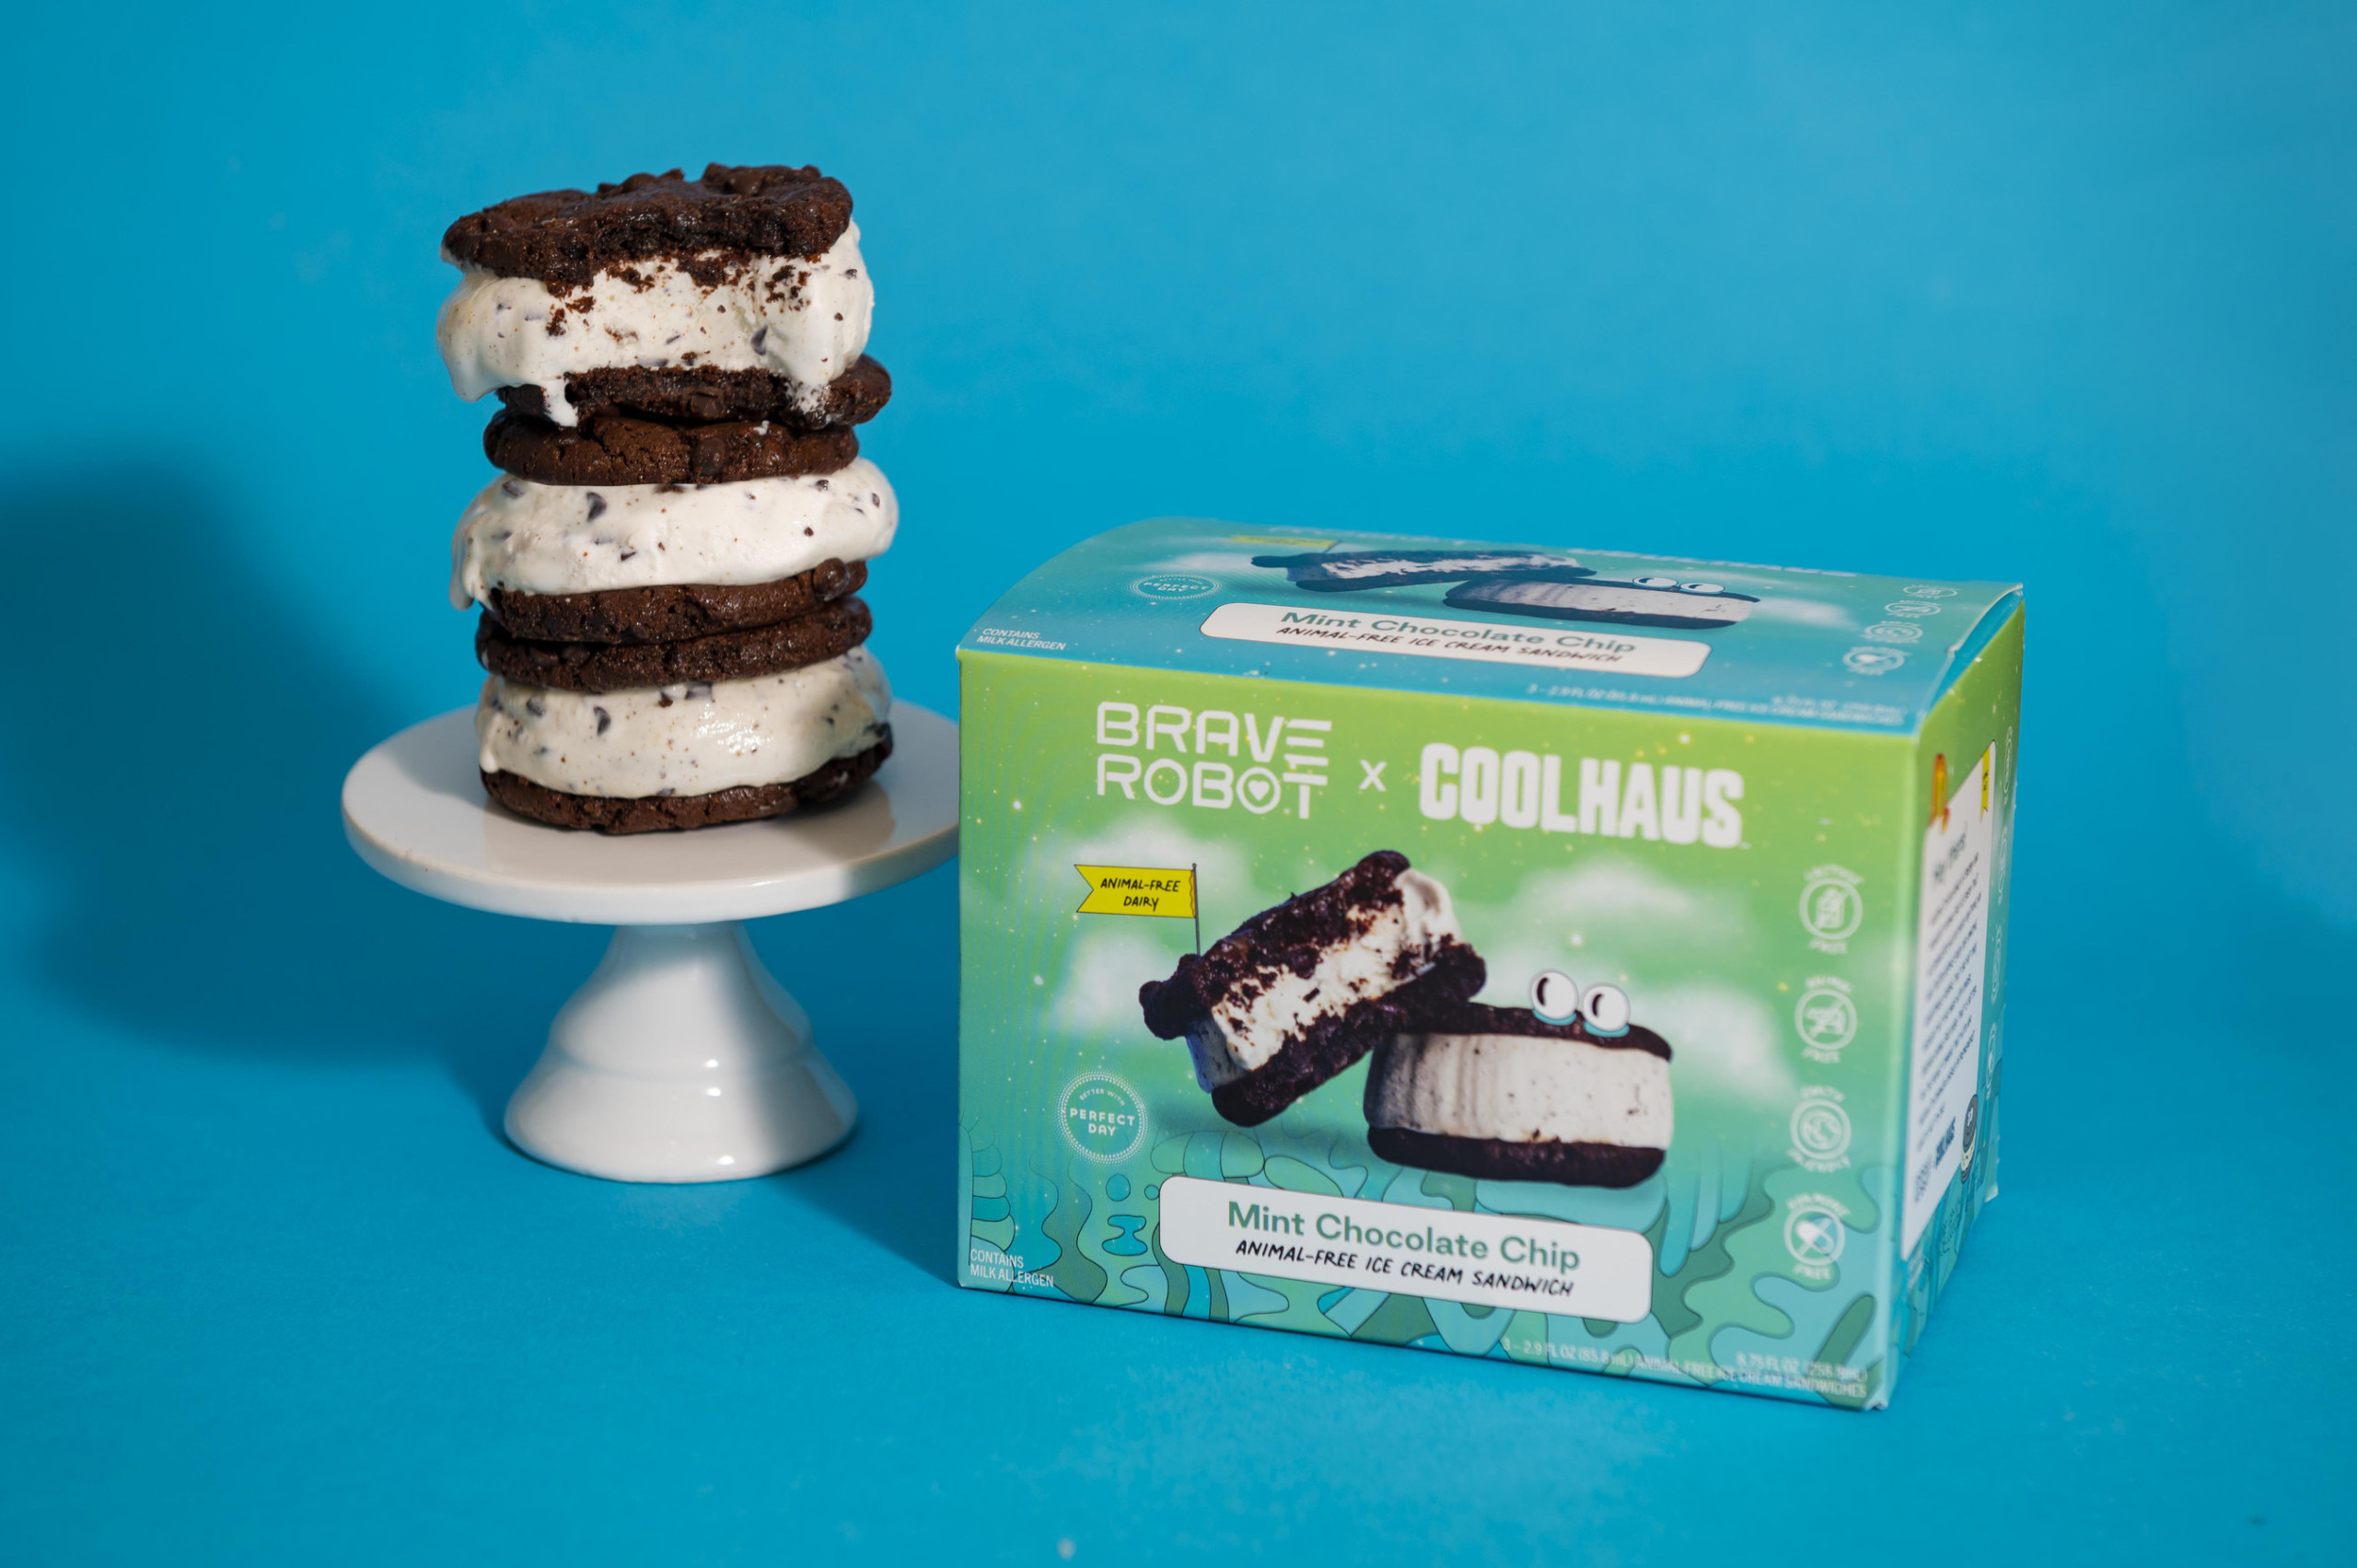 The Urgent Company’s Brave Robot and Coolhaus Brands Rollout the Company’s First Animal-Free Dairy Product Collaboration